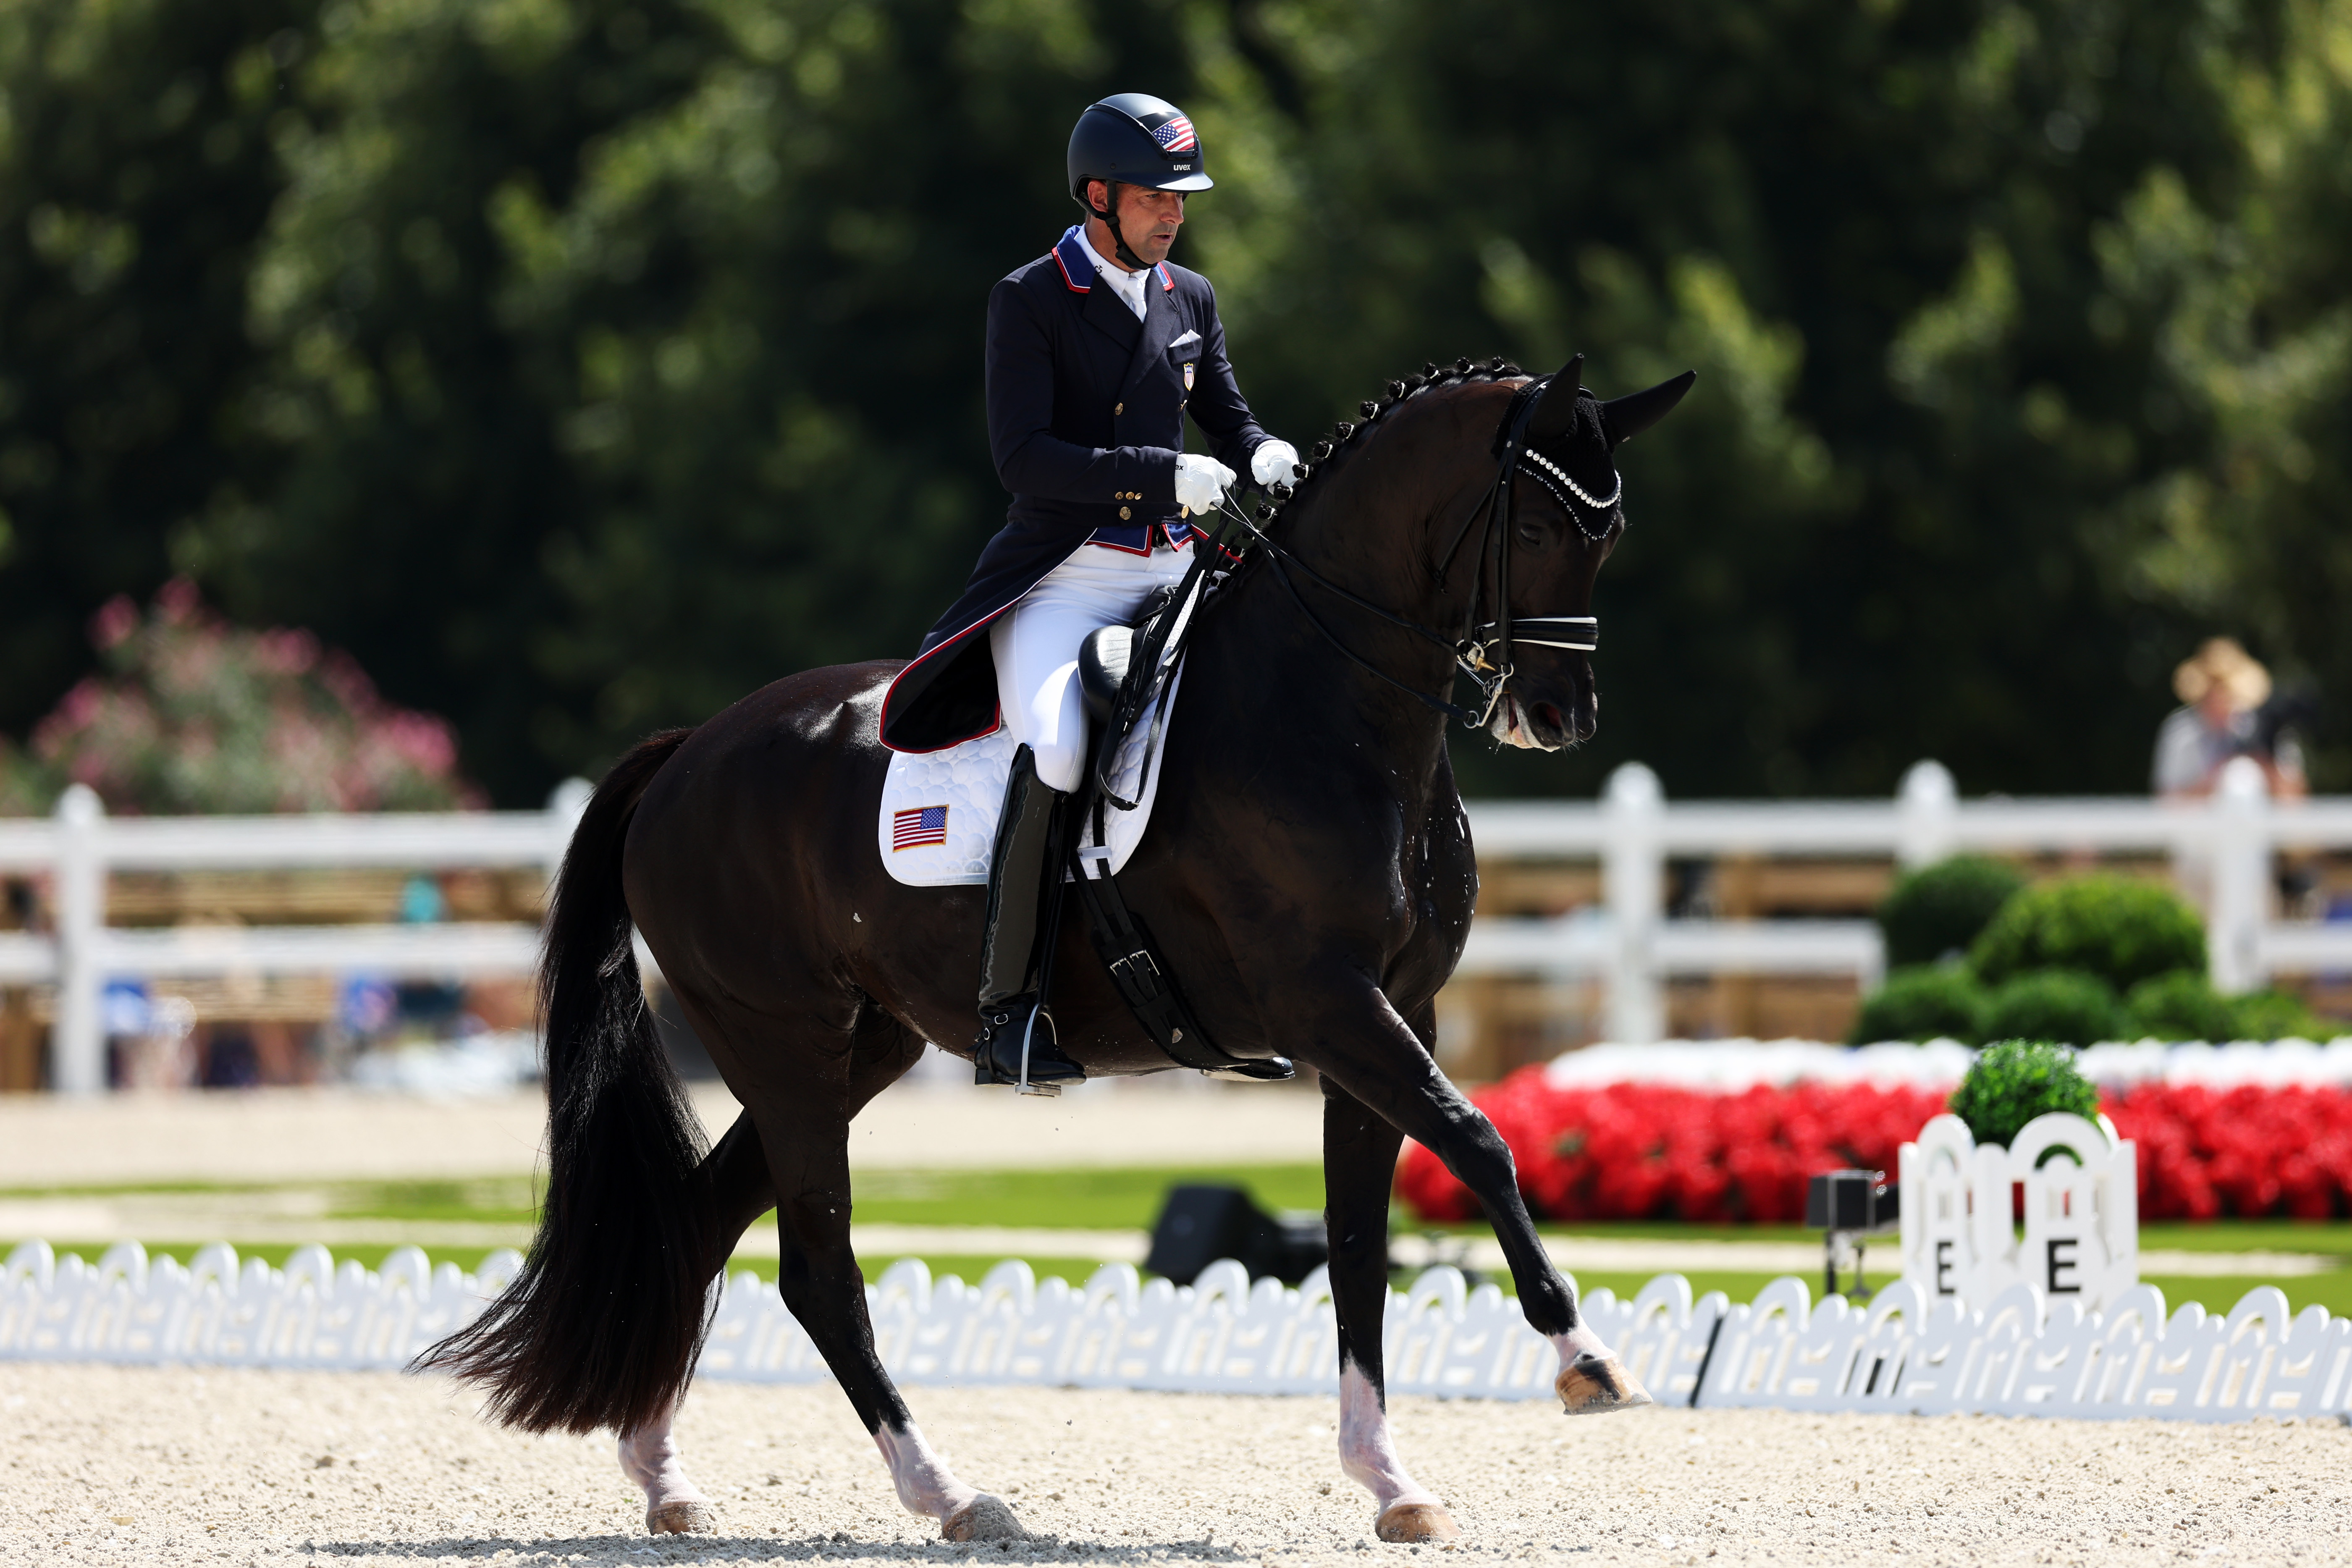 Team USA eliminated from Olympic dressage after horse displays blood on leg